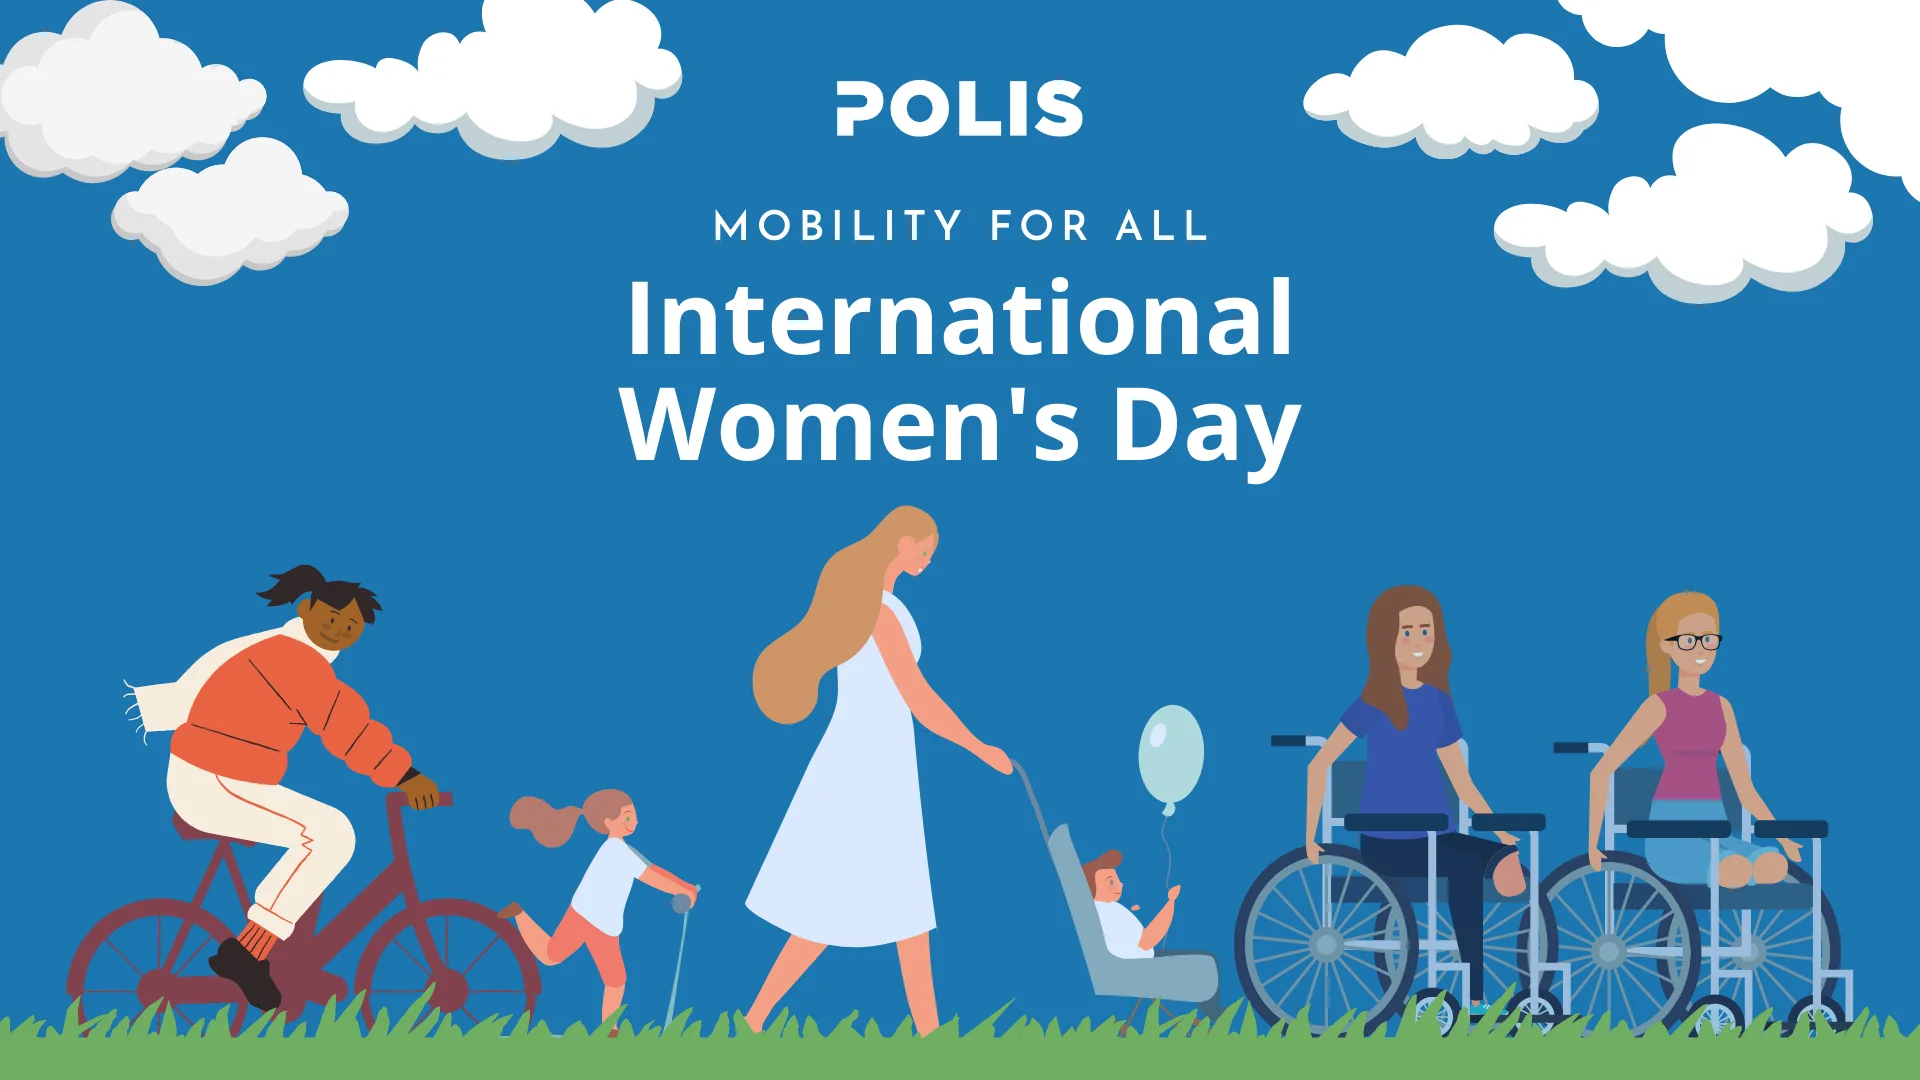 Under her own steam: Closing the mobility gender gap